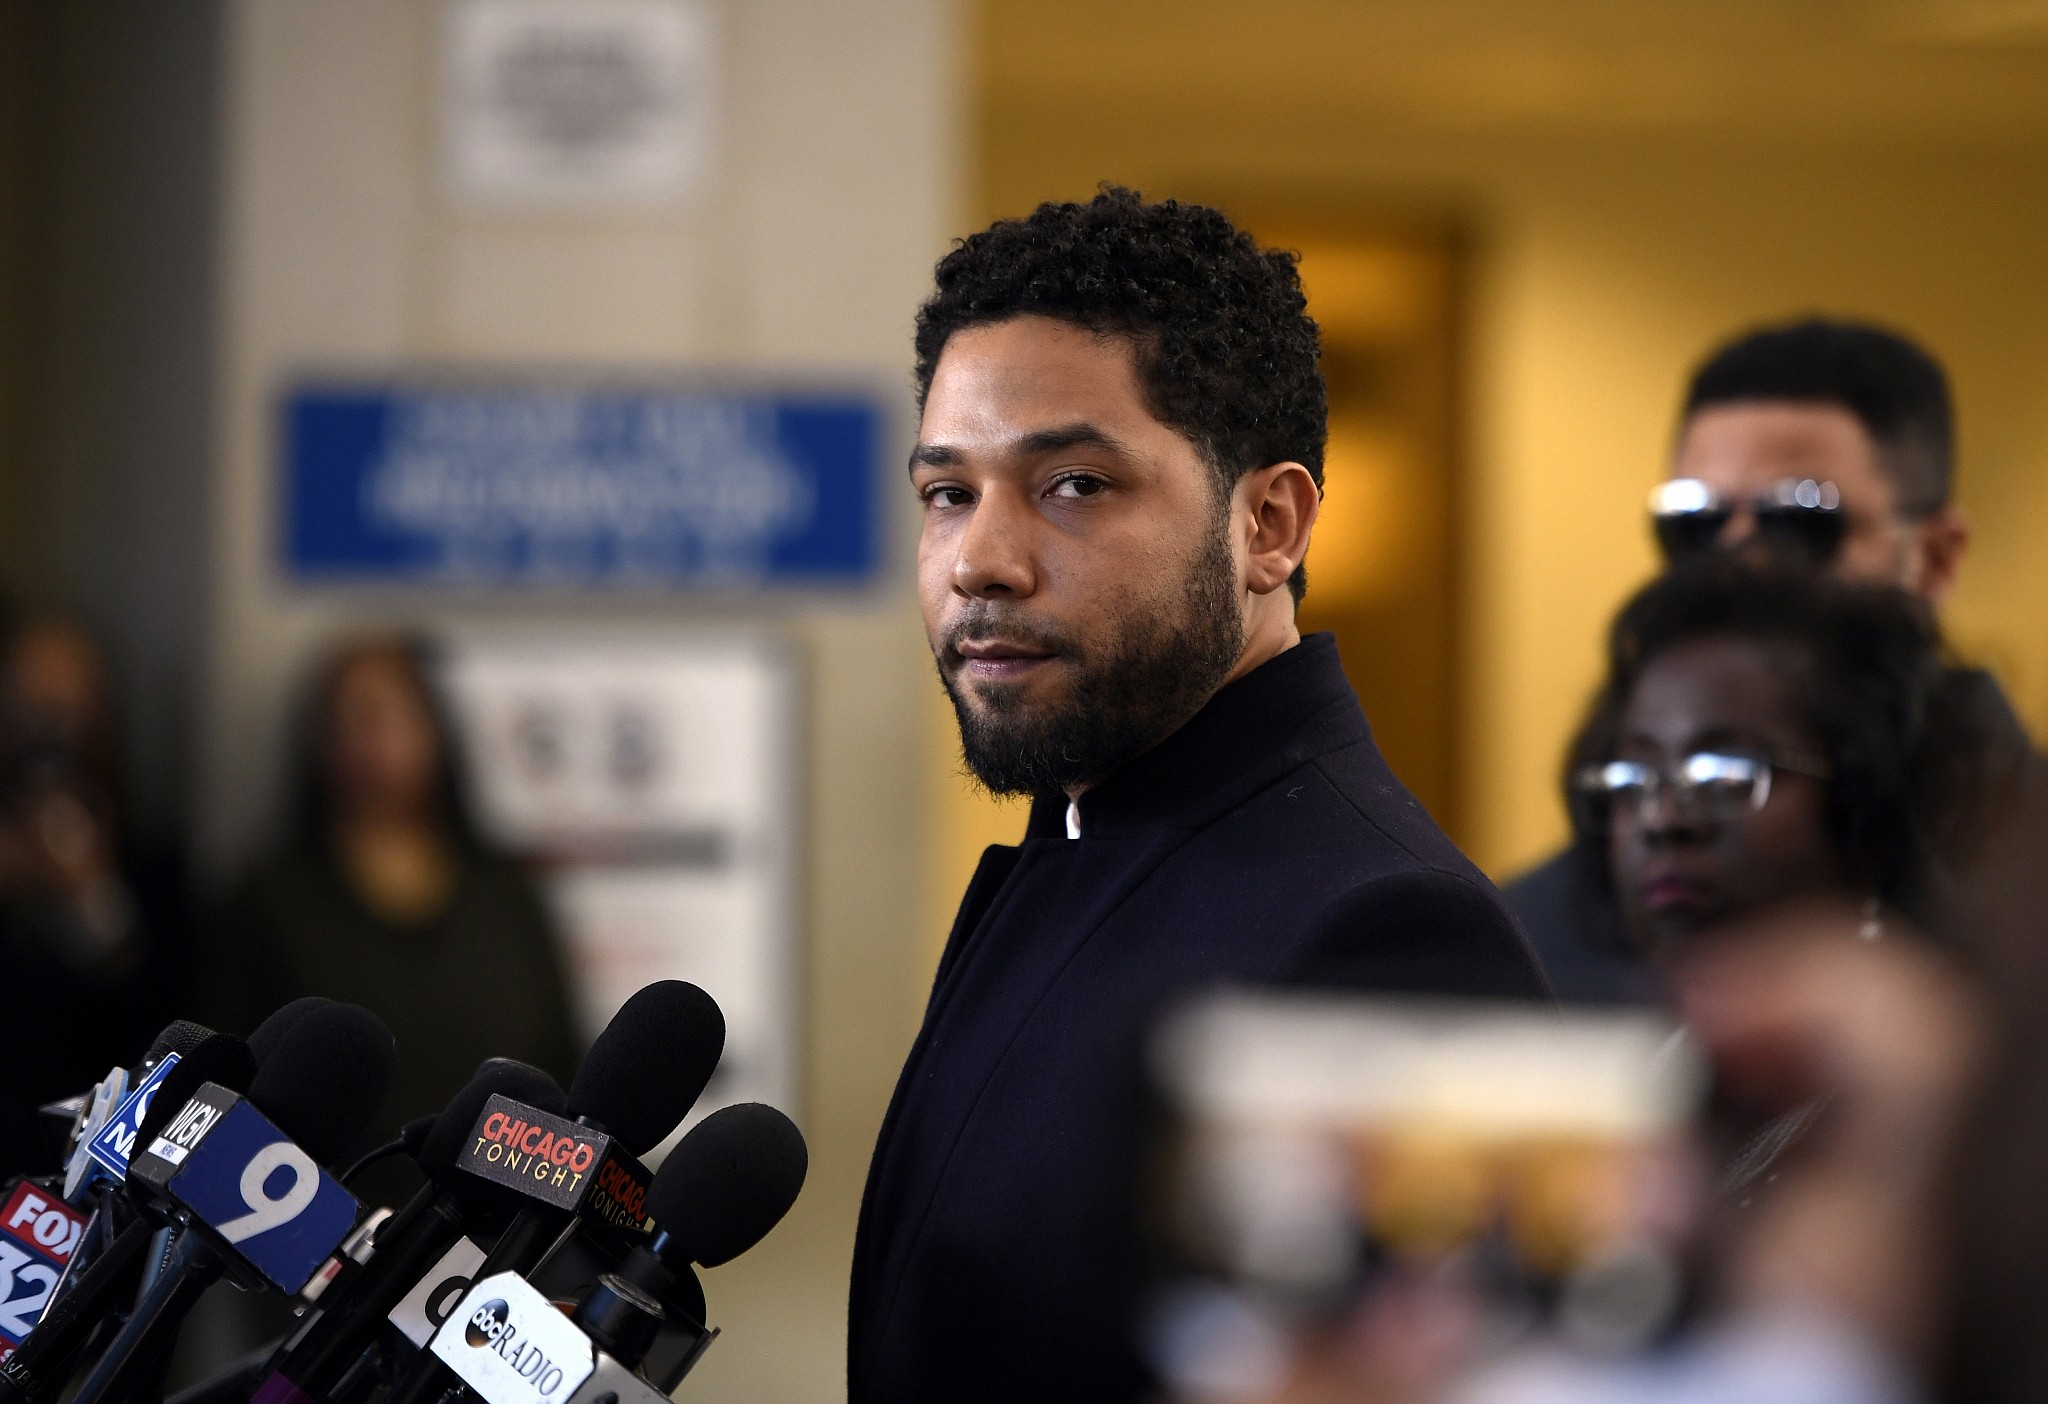 Jussie Smollett is found guilty, RuPaul’s Drag Race continues to evolve & A Trans Christmas Ornament Project will warm your heart – Friday, December 10, 2021